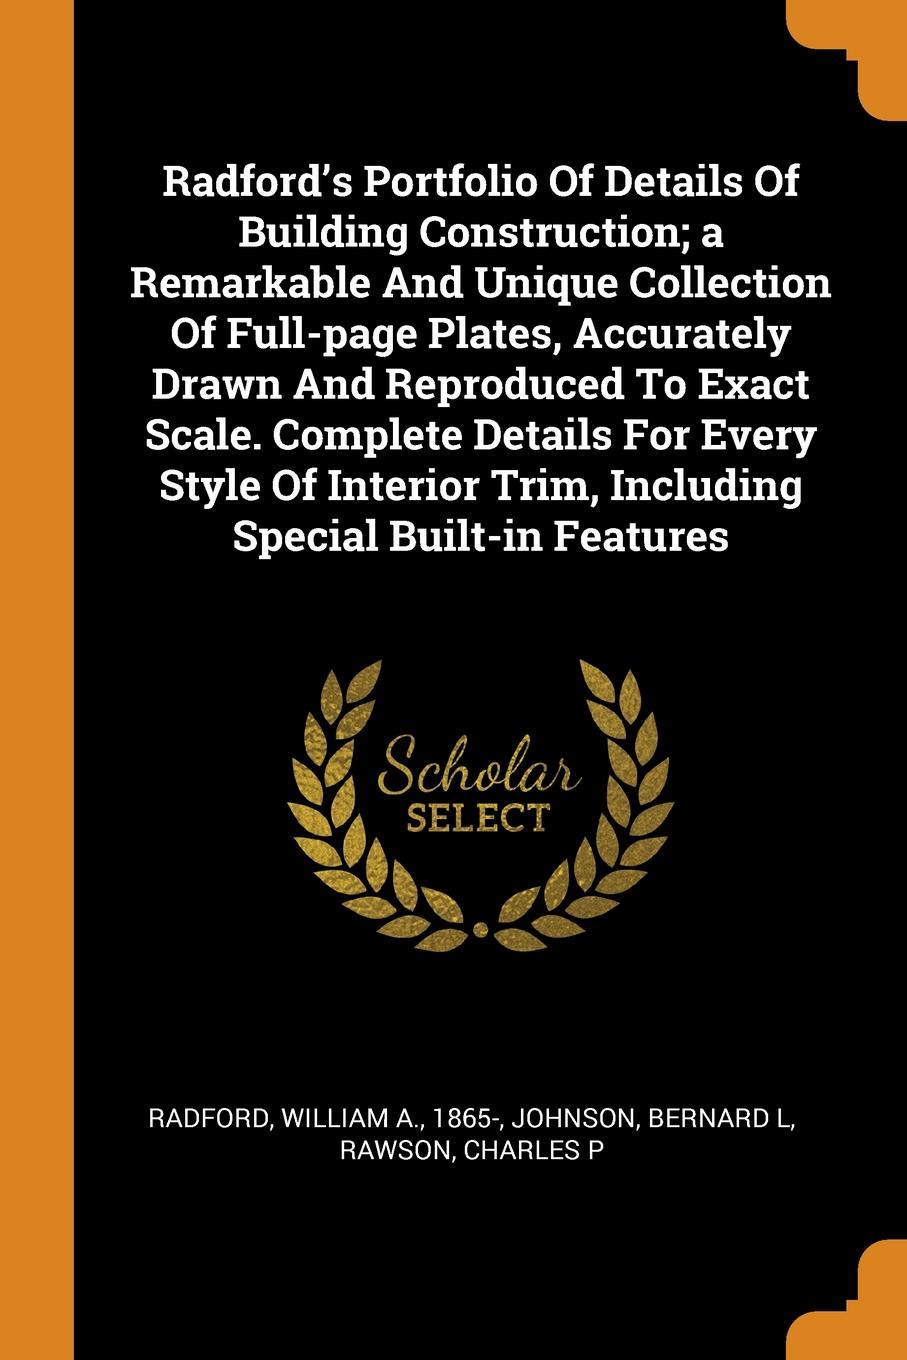 Radford.s Portfolio Of Details Of Building Construction; a Remarkable And Unique Collection Of Full-page Plates, Accurately Drawn And Reproduced To Exact Scale. Complete Details For Every Style Of Interior Trim, Including Special Built-in Features